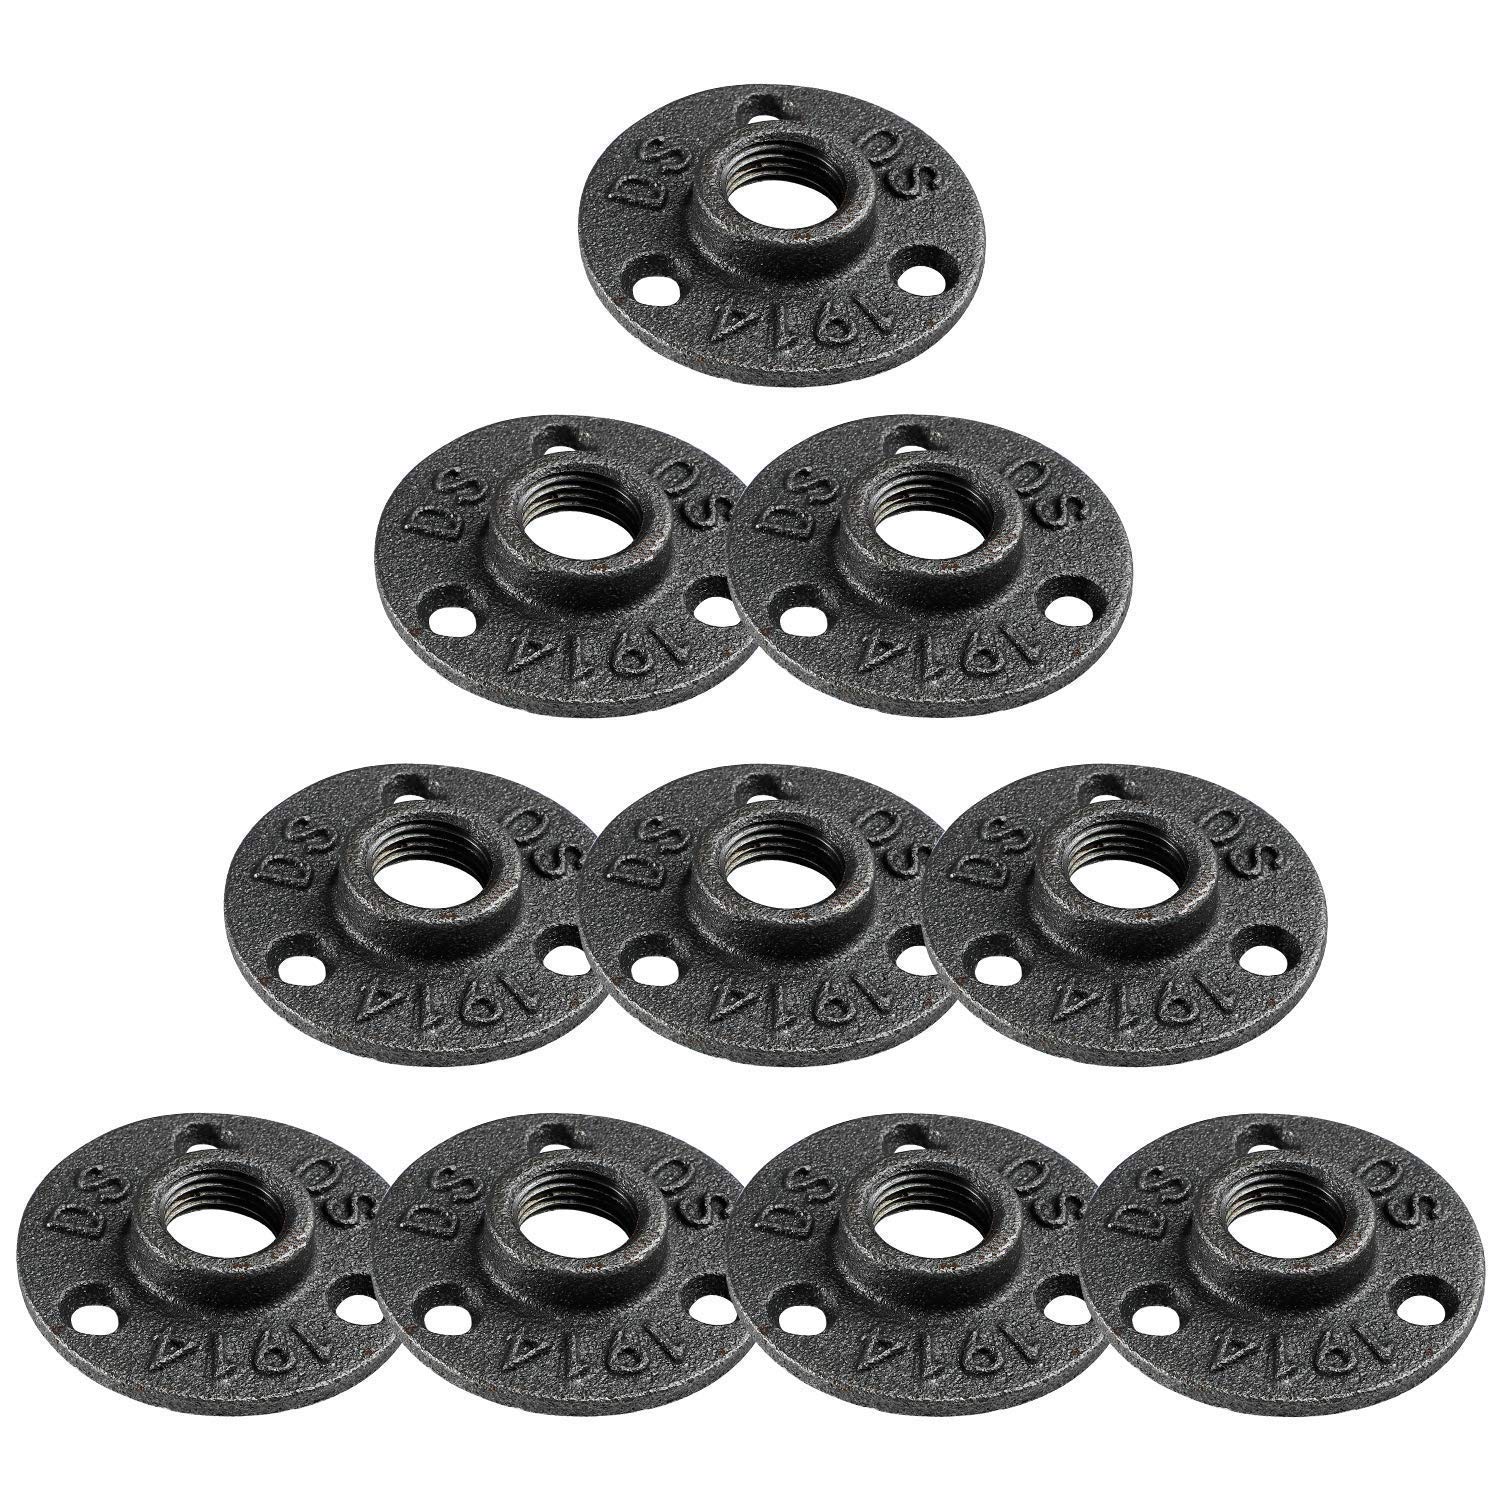 1Pcs 1/2" 3/4" Floor Flange Industrial Steel Malleable Cast Iron Pipe Fittings Retro Decor Furniture DIY BSP Threaded Hole